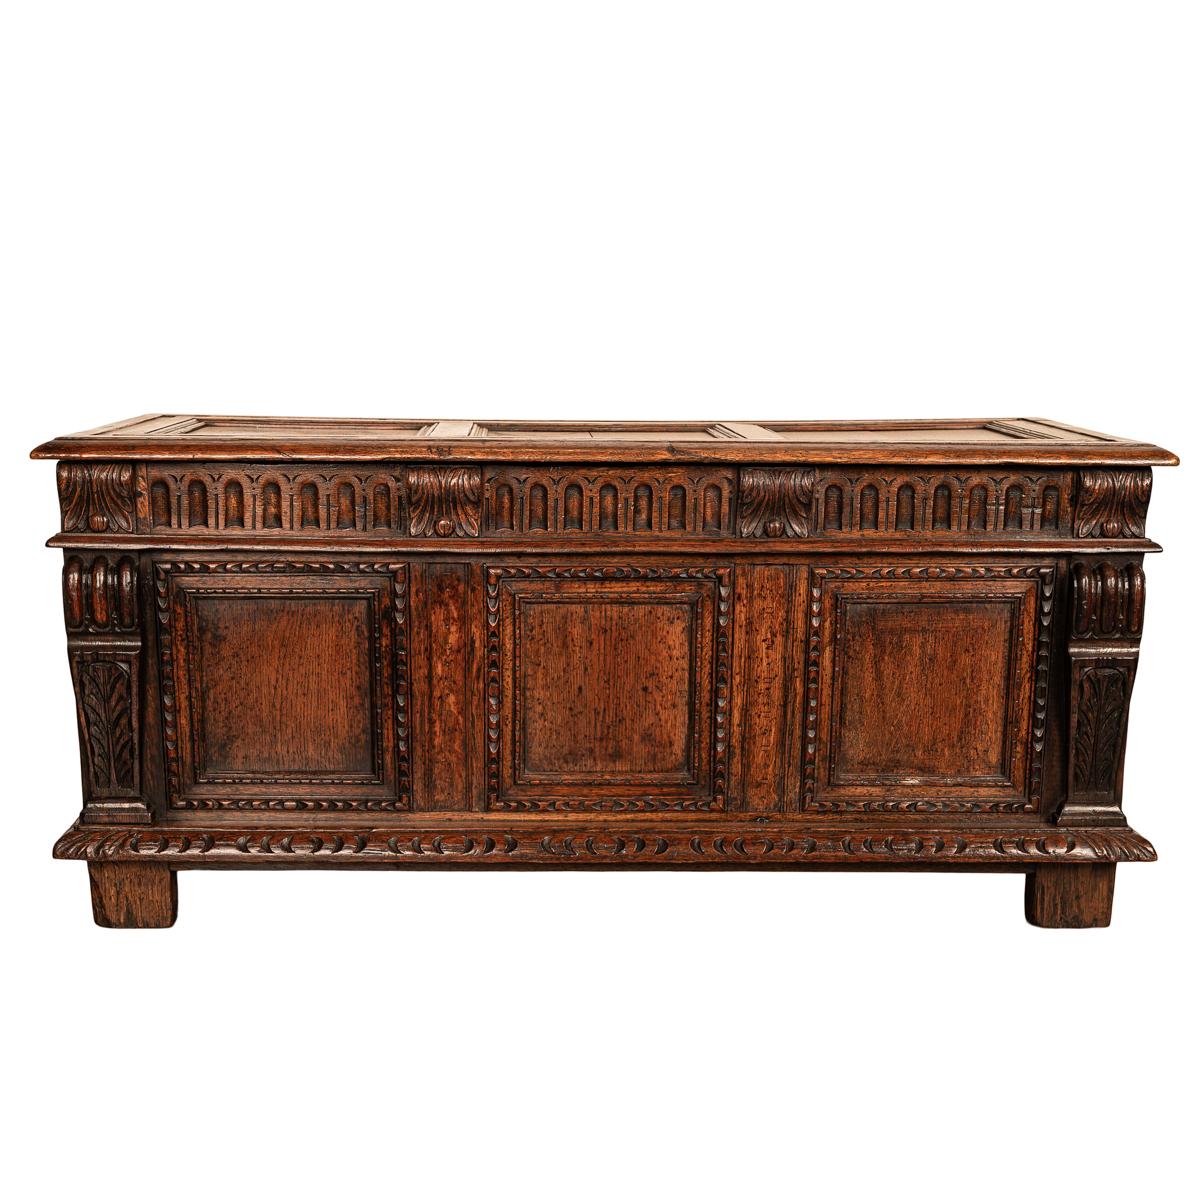 A good antique carved oak Renaissance Revival oak coffer, chest, window seat, circa 1880.
The three paneled lid having hand-forged iron strap hinges, enclosing a storage reservoir below. The front of the coffer having a carved arcaded frieze which